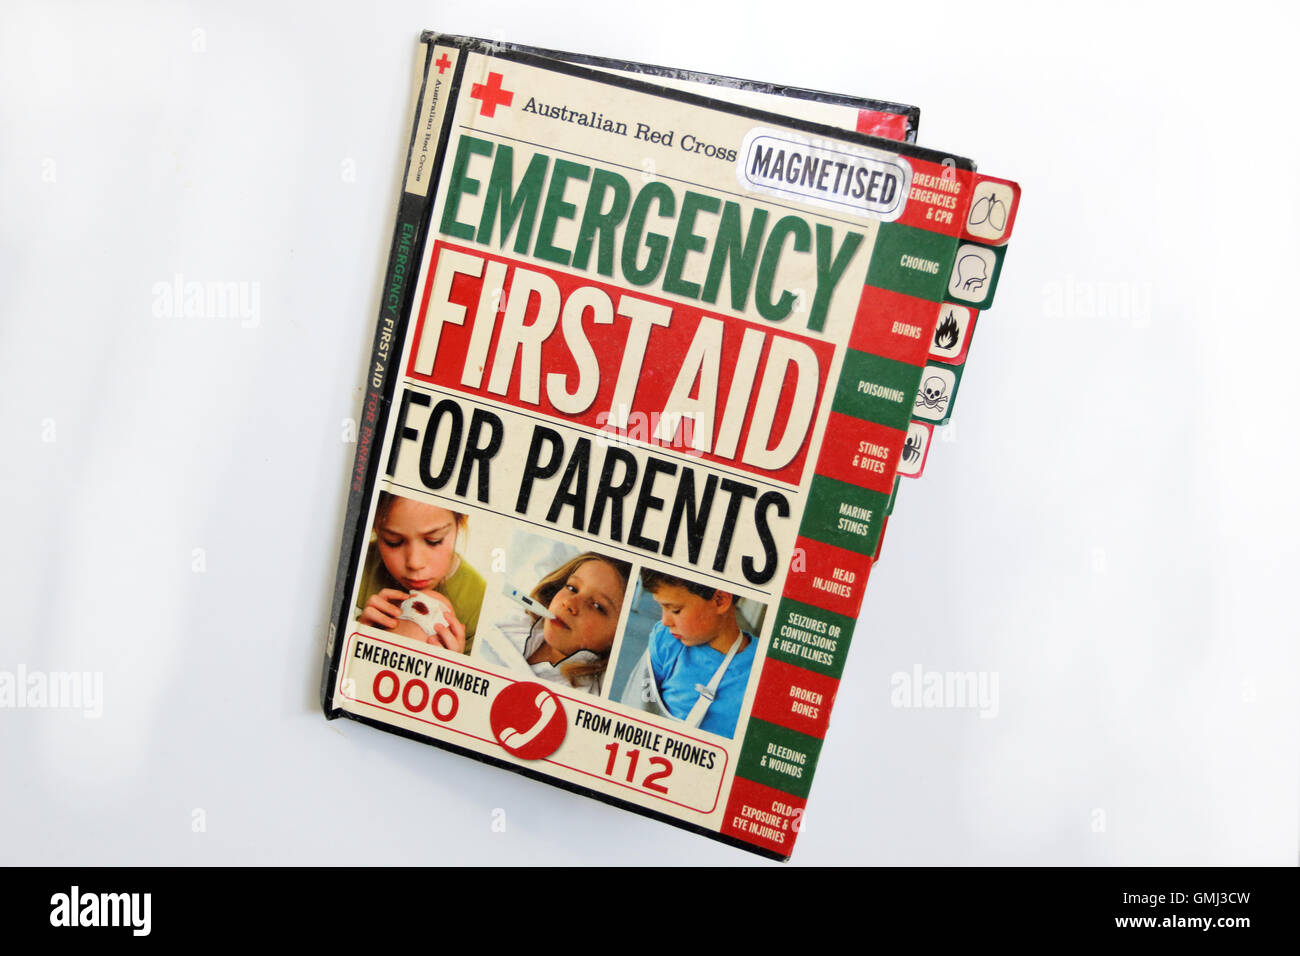 First Aid book for parents on fridge door Stock Photo